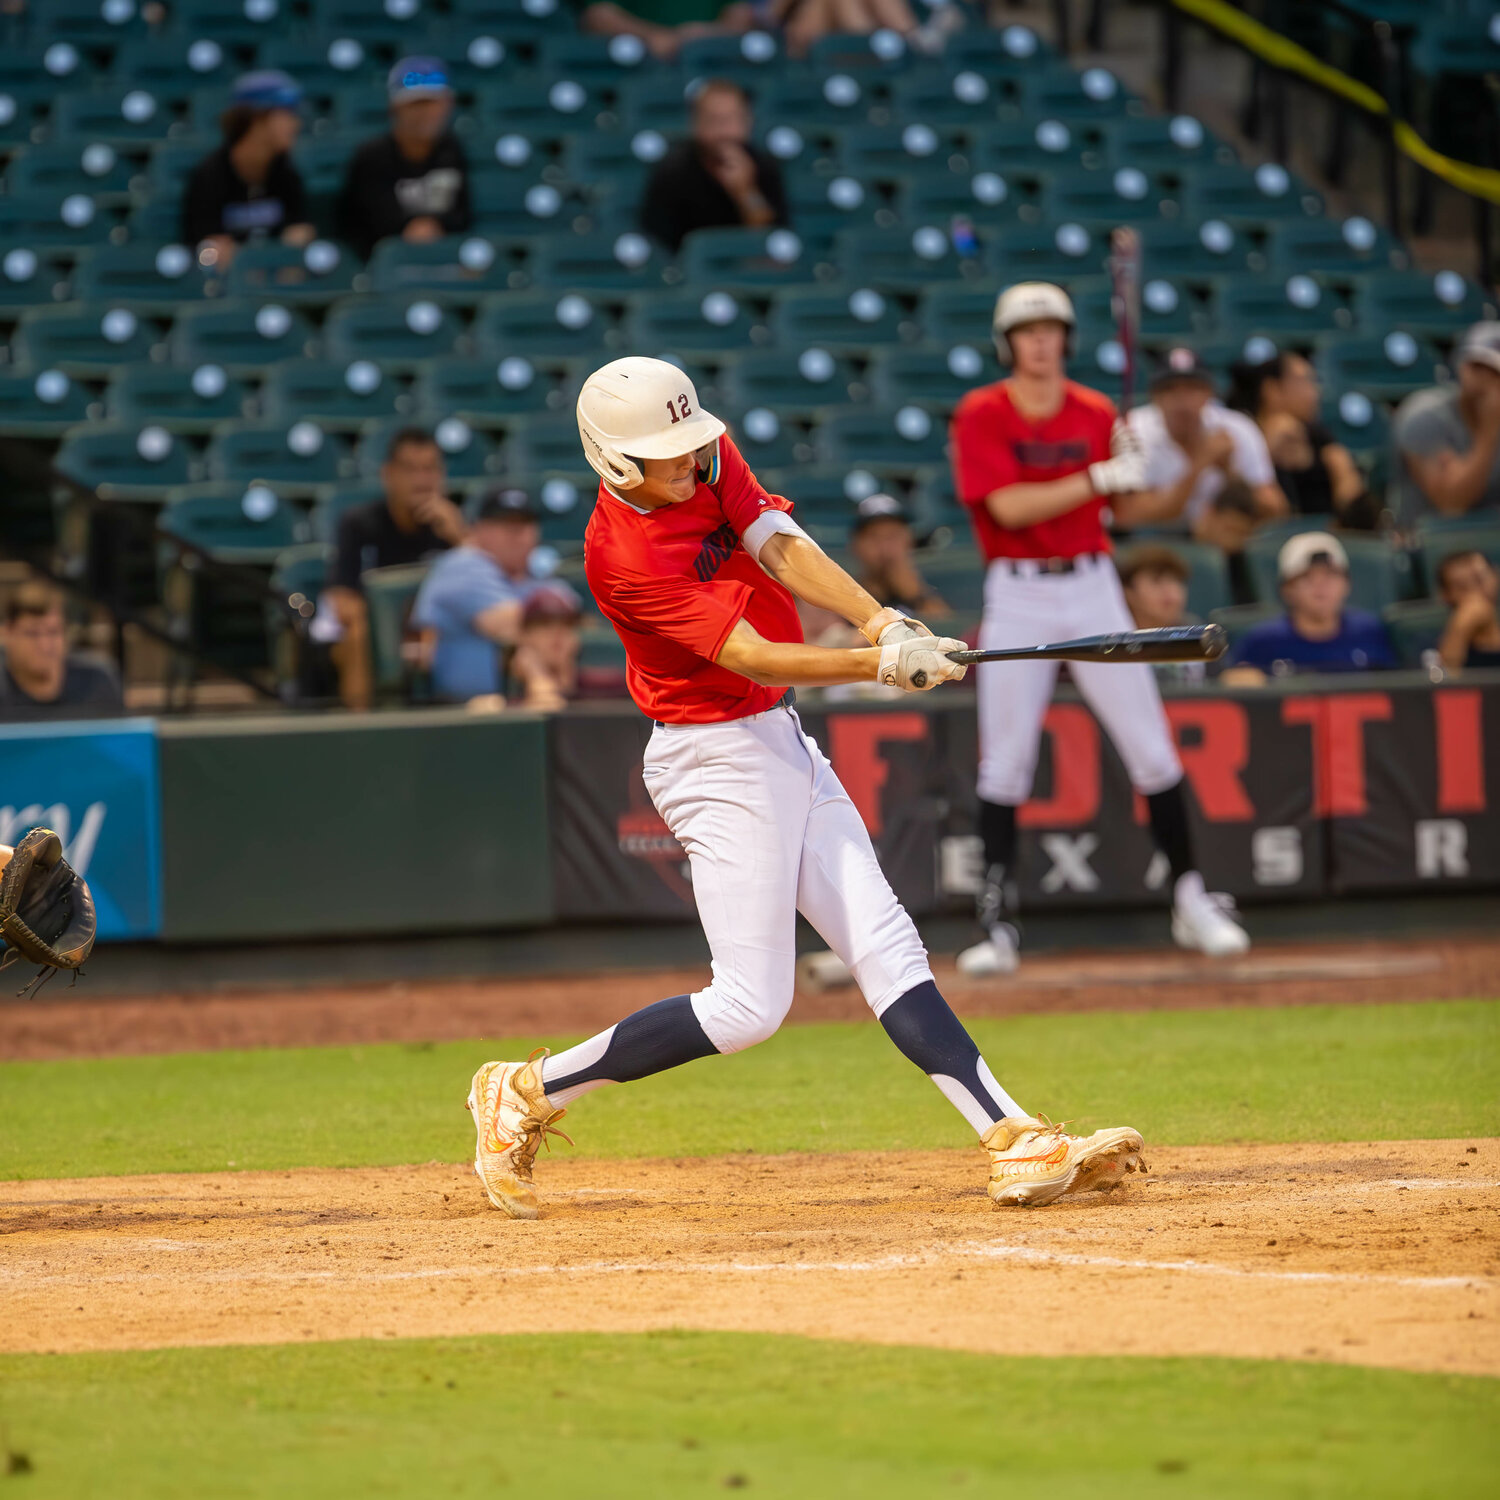 Nate Johnson hits a sac fly during Tuesday's GHBCA Futures All-Star game at Constellation Field in Sugar Land.